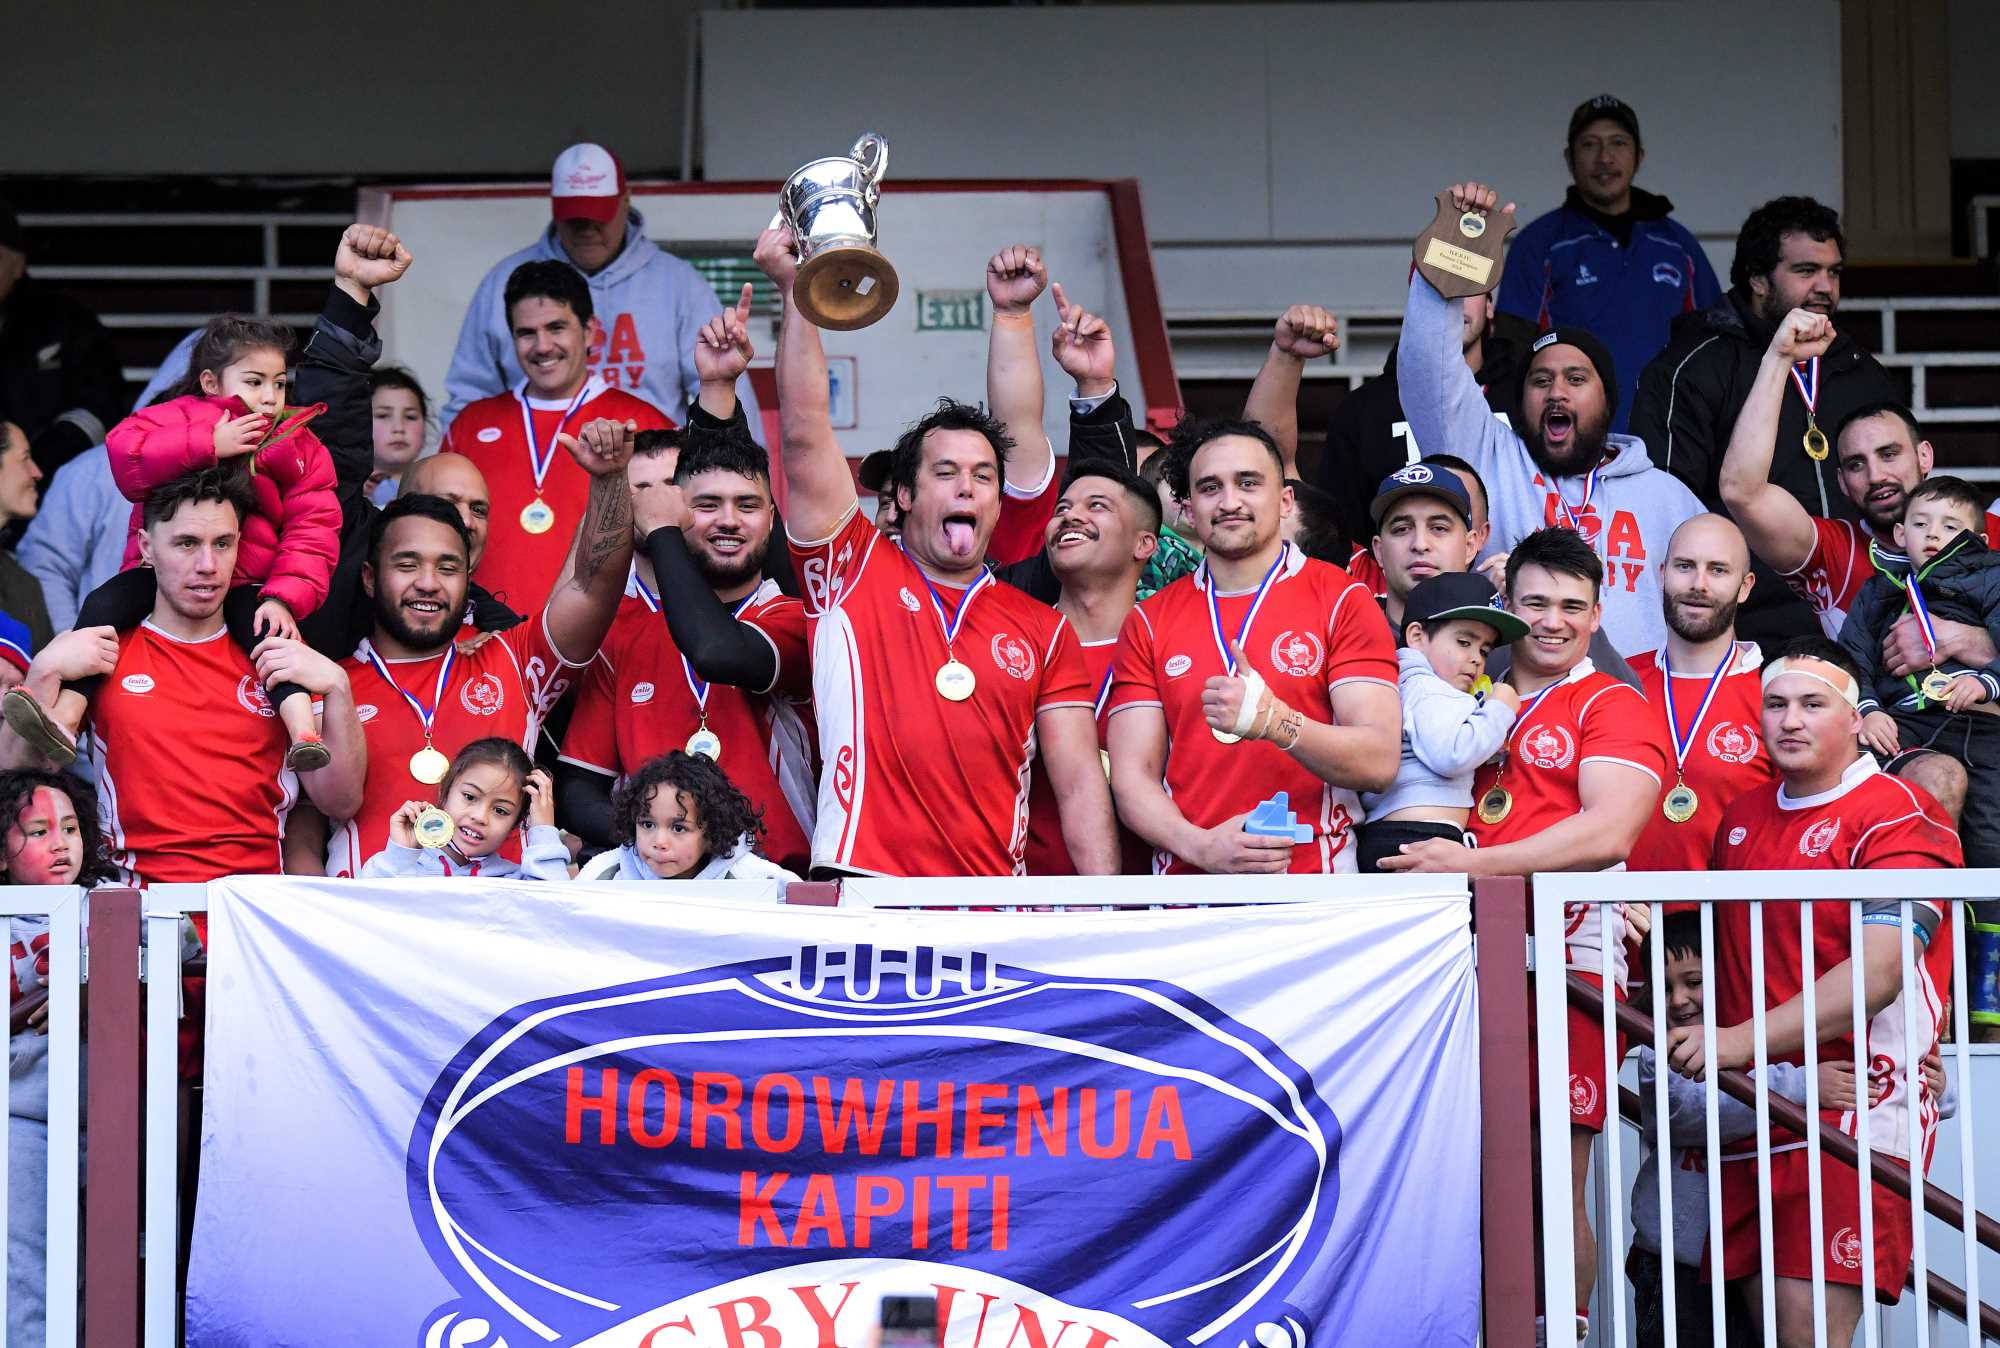 Toa celebrates winning the Horowhenua-Kapiti premier club rugby union final between Toa and Rahui at Levin Domain in Levin, New Zealand on Saturday, 28 July 2018. Photo: Dave Lintott / lintottphoto.co.nz